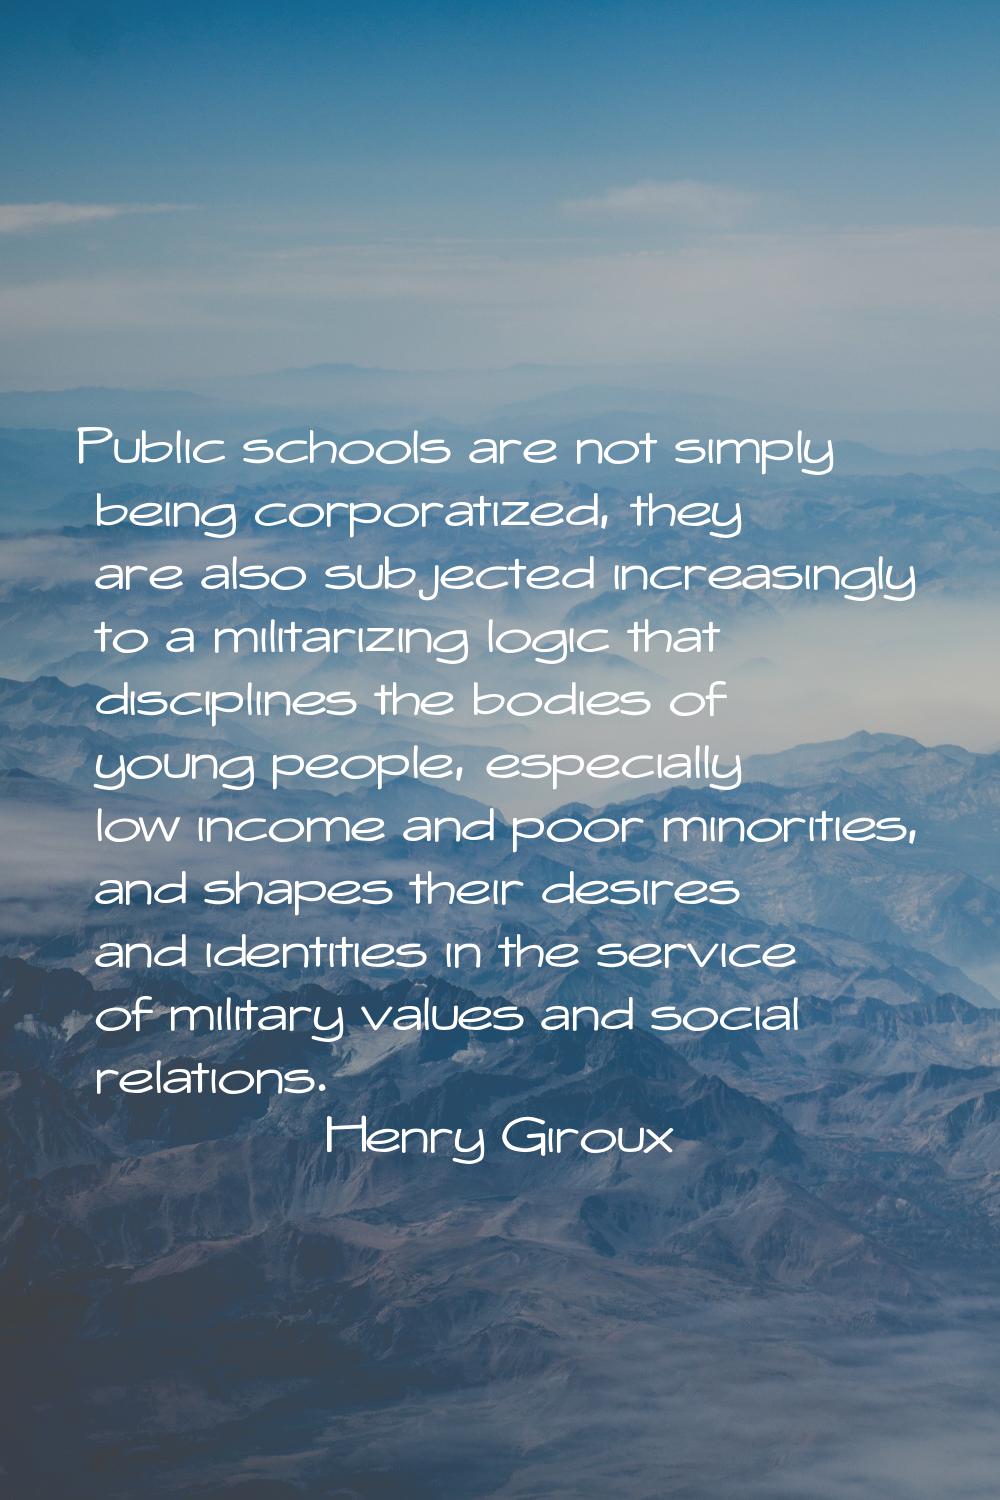 Public schools are not simply being corporatized, they are also subjected increasingly to a militar